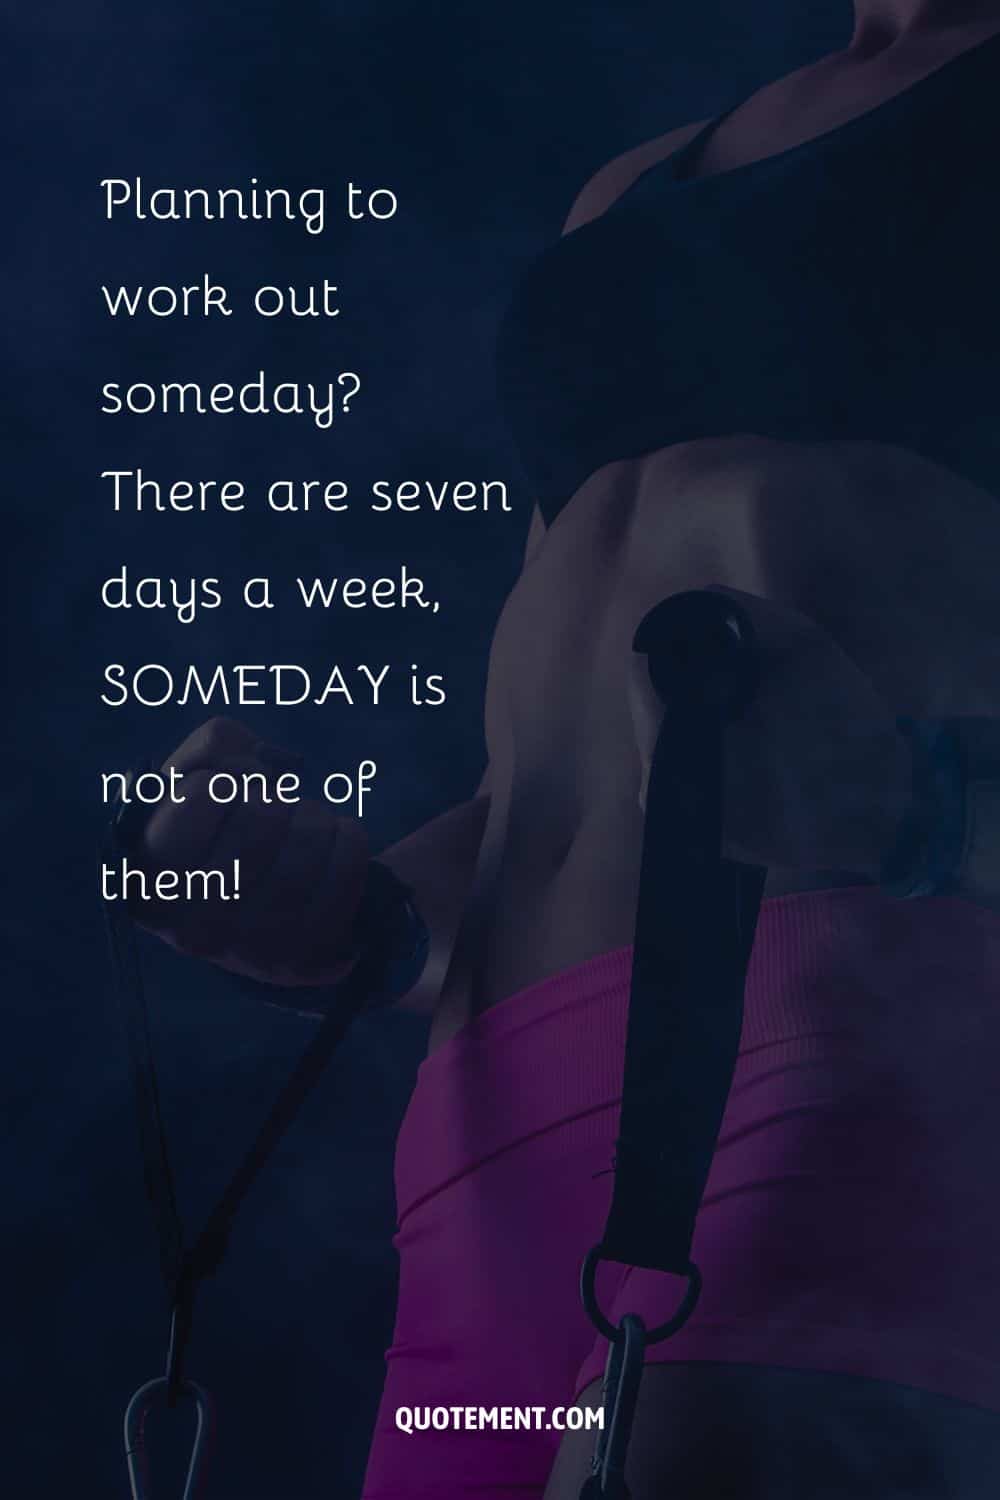 There are seven days a week, SOMEDAY is not one of them